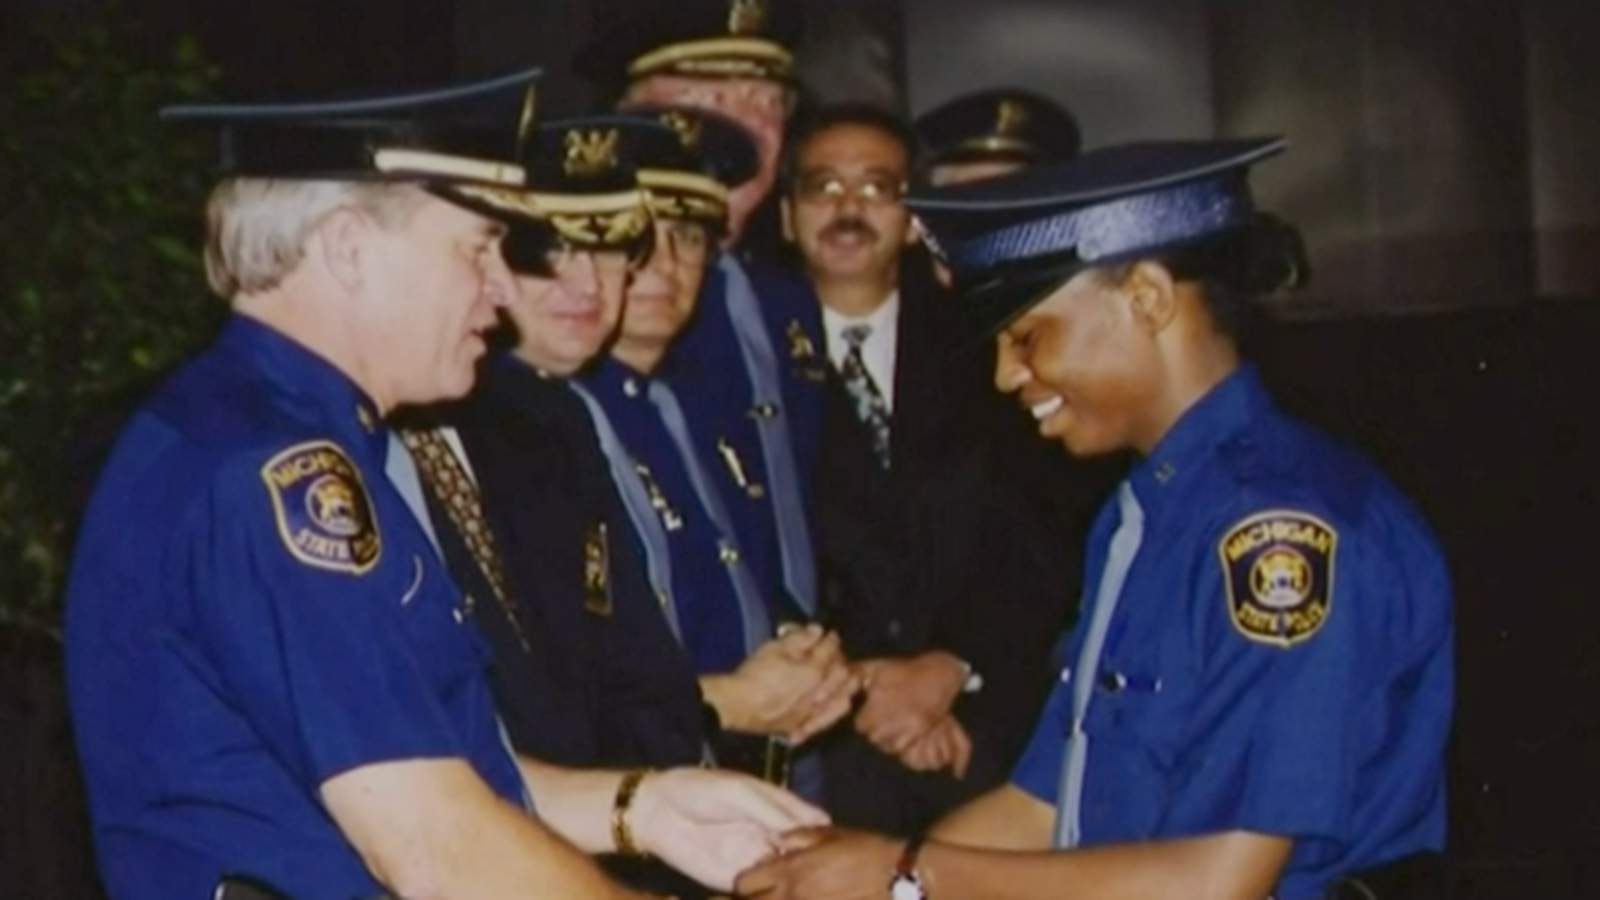 African-American woman rises through Michigan State Police ranks -- here’s her story